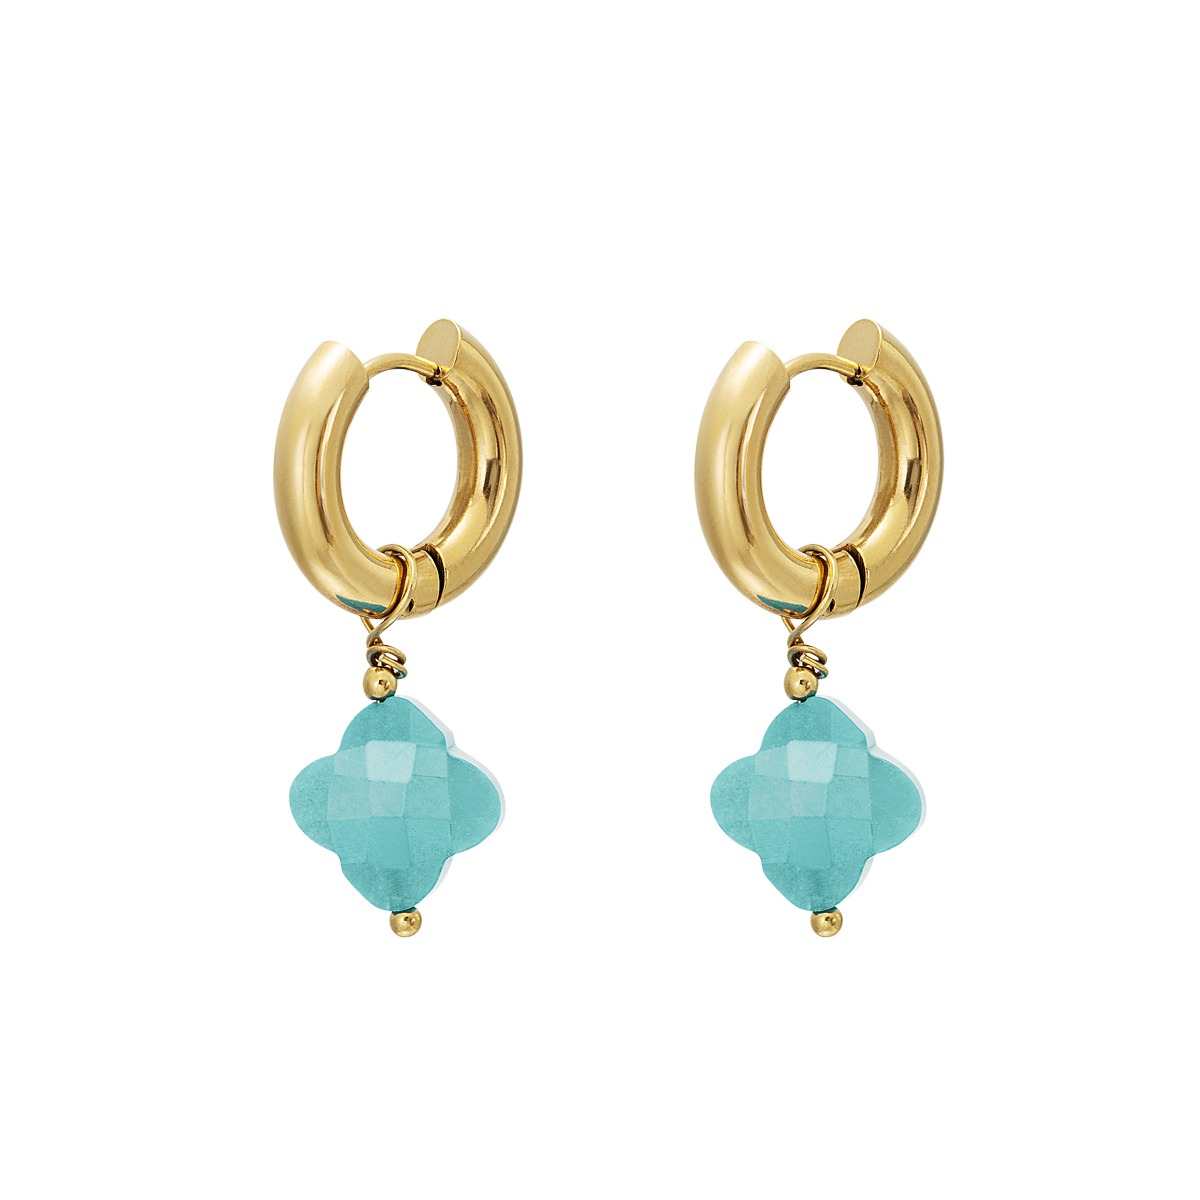 Clover earrings - #summergirls collection